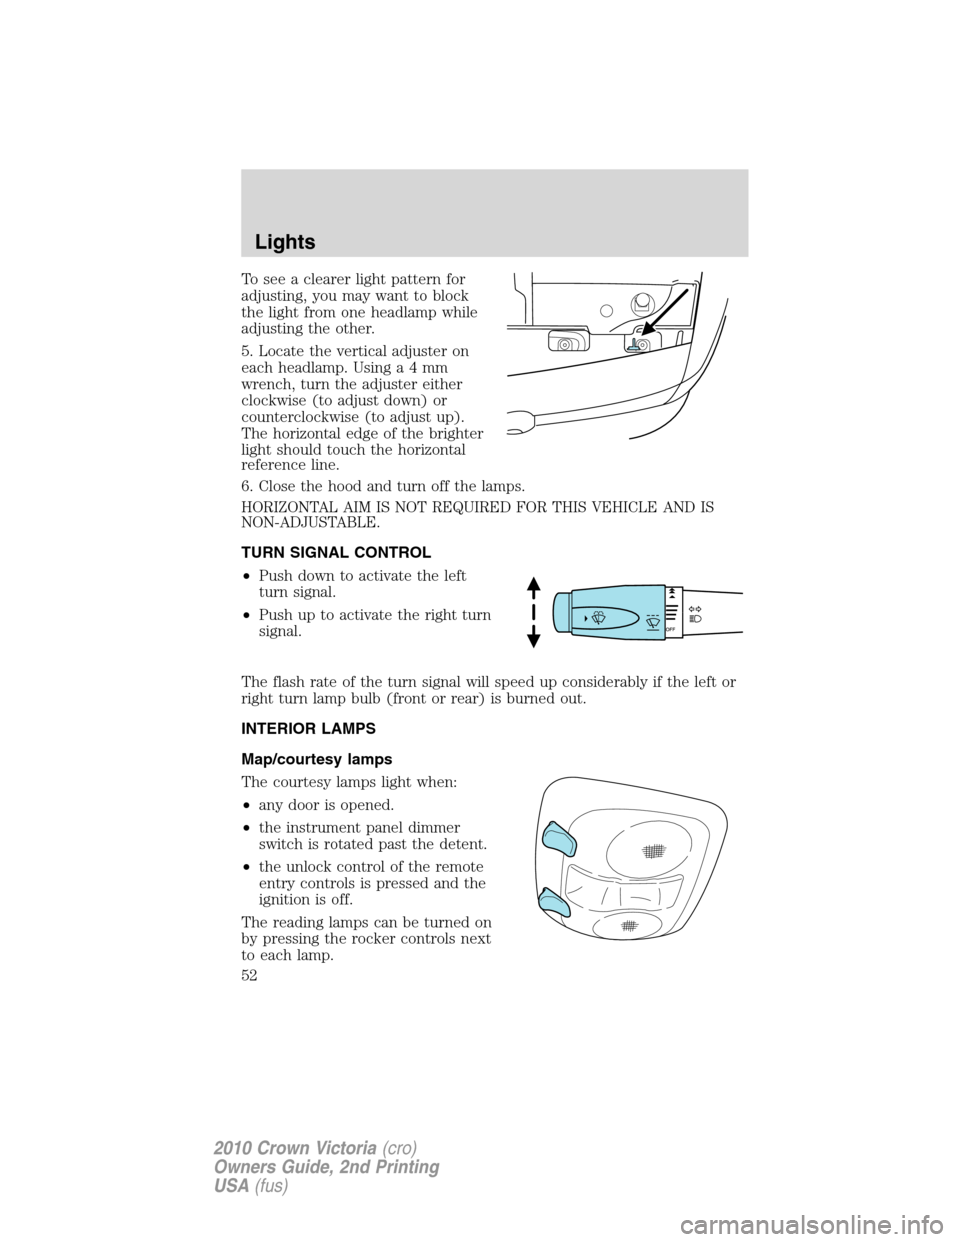 Mercury Grand Marquis 2010  Owners Manuals To see a clearer light pattern for
adjusting, you may want to block
the light from one headlamp while
adjusting the other.
5. Locate the vertical adjuster on
each headlamp. Usinga4mm
wrench, turn the 